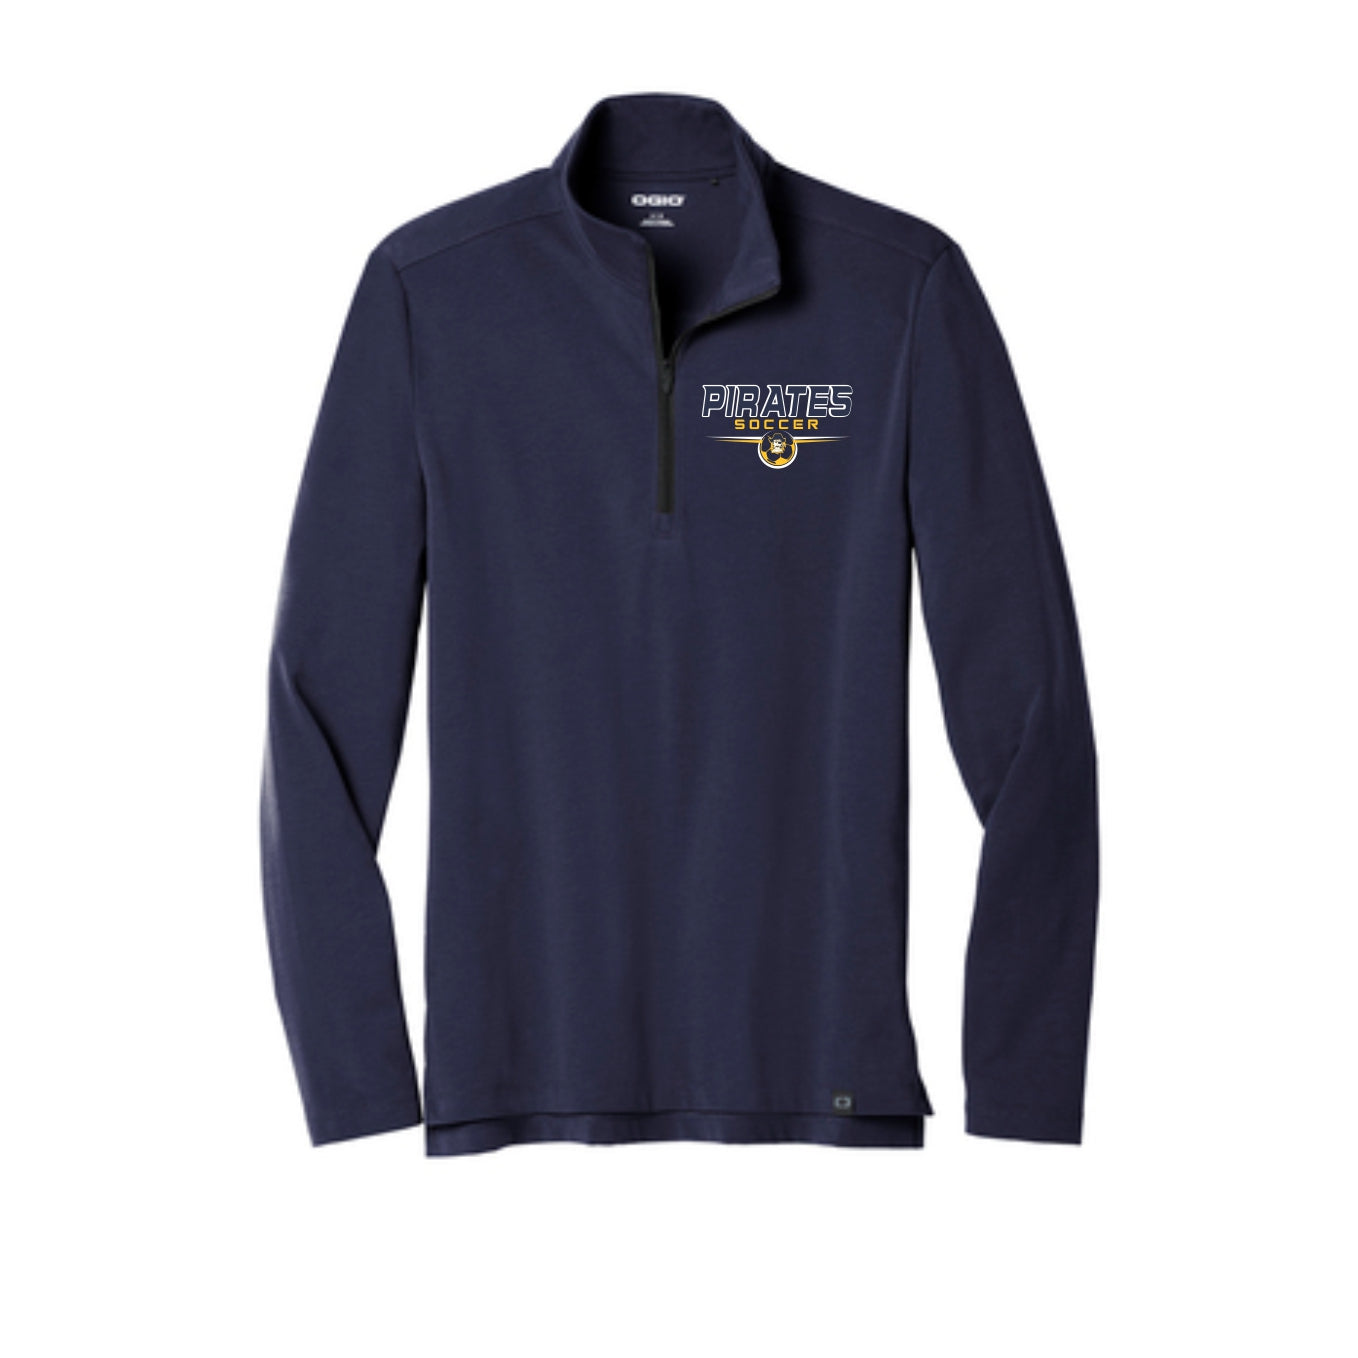 PIrate Boys Soccer -- Ogio Limit 1/4 Zip -- Adult